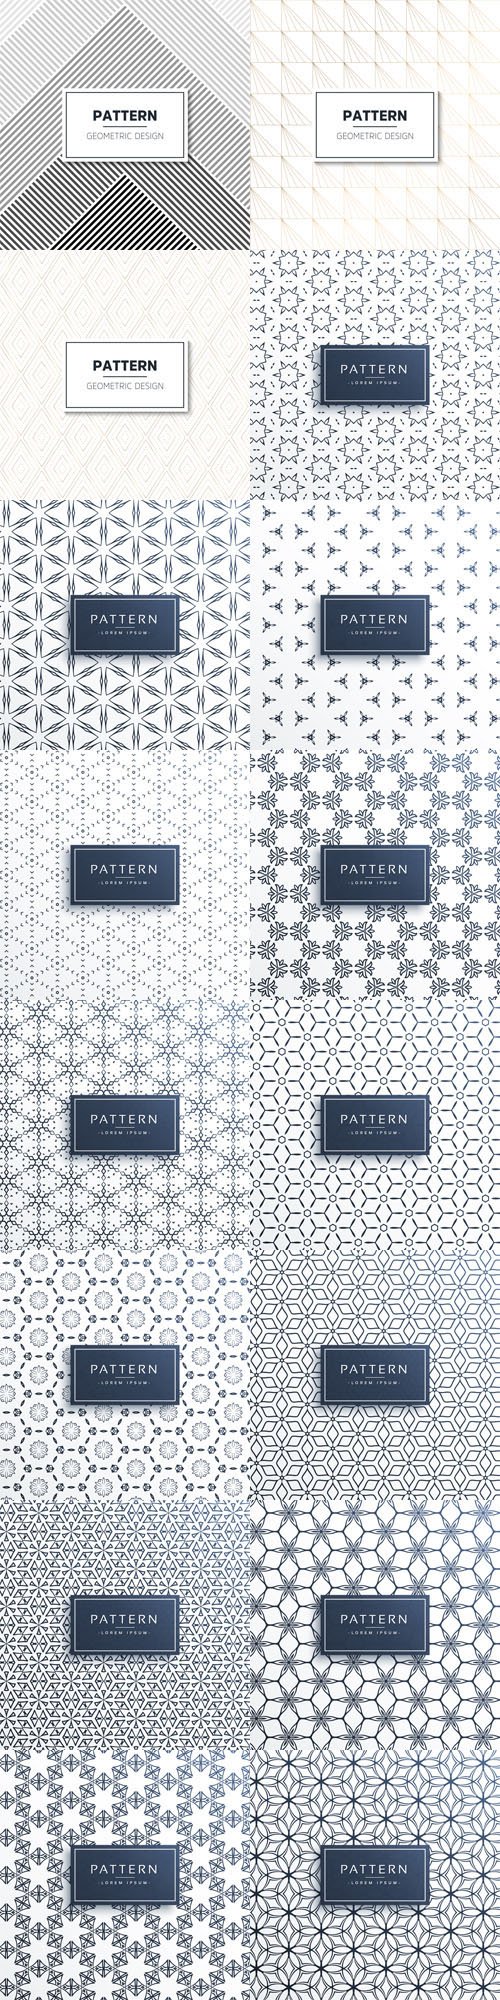 16 Seamless Patterns - Vector Graphics